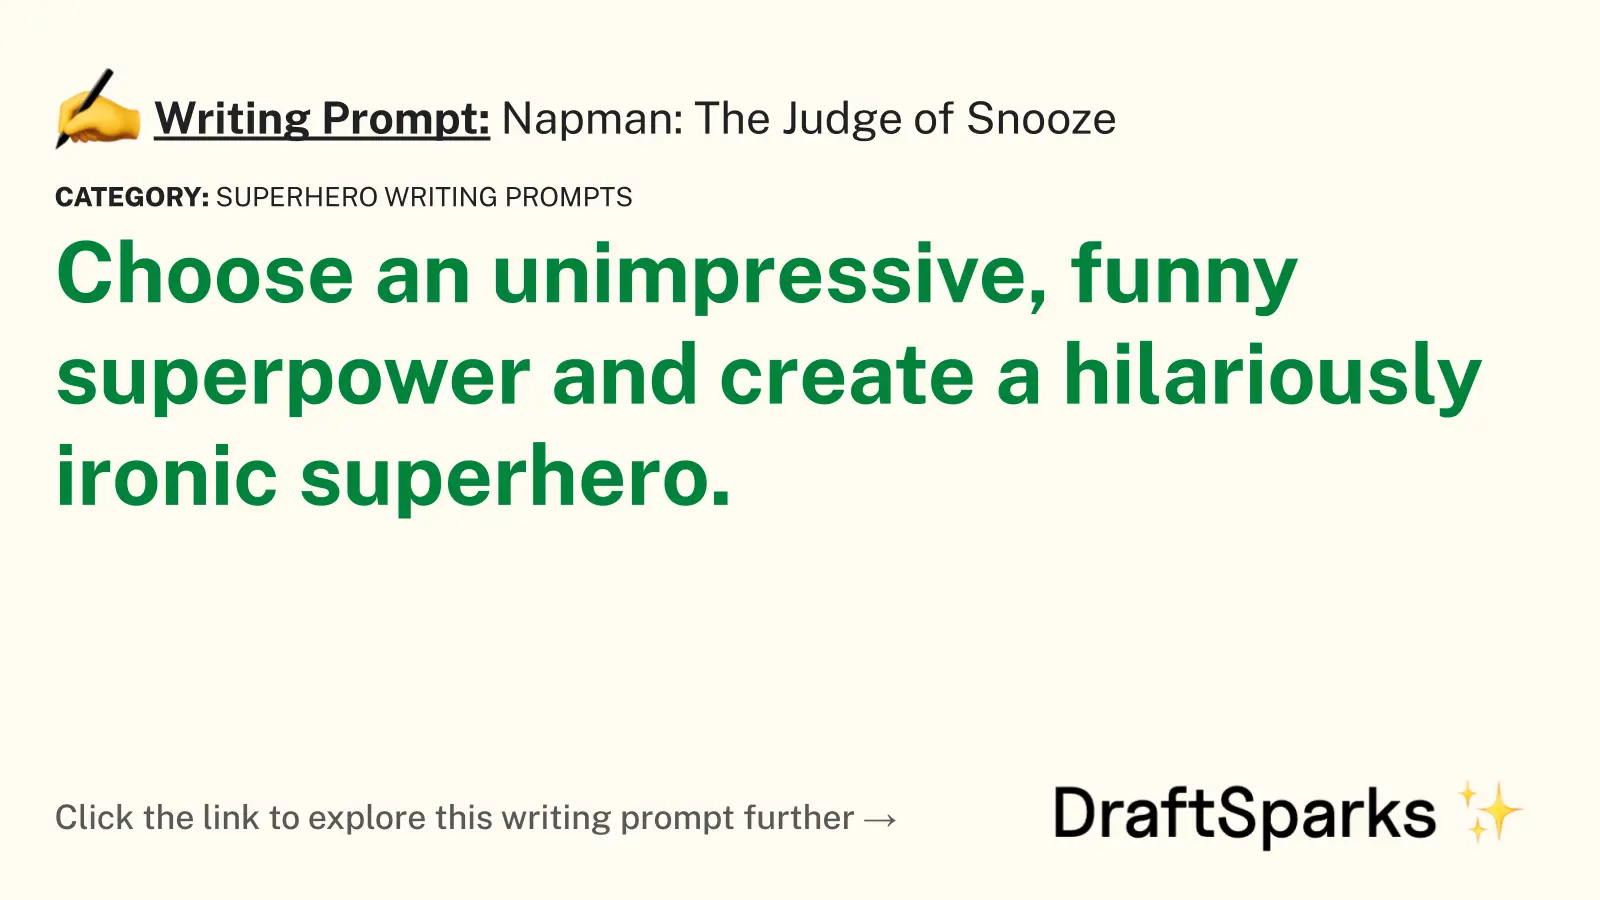 Napman: The Judge of Snooze